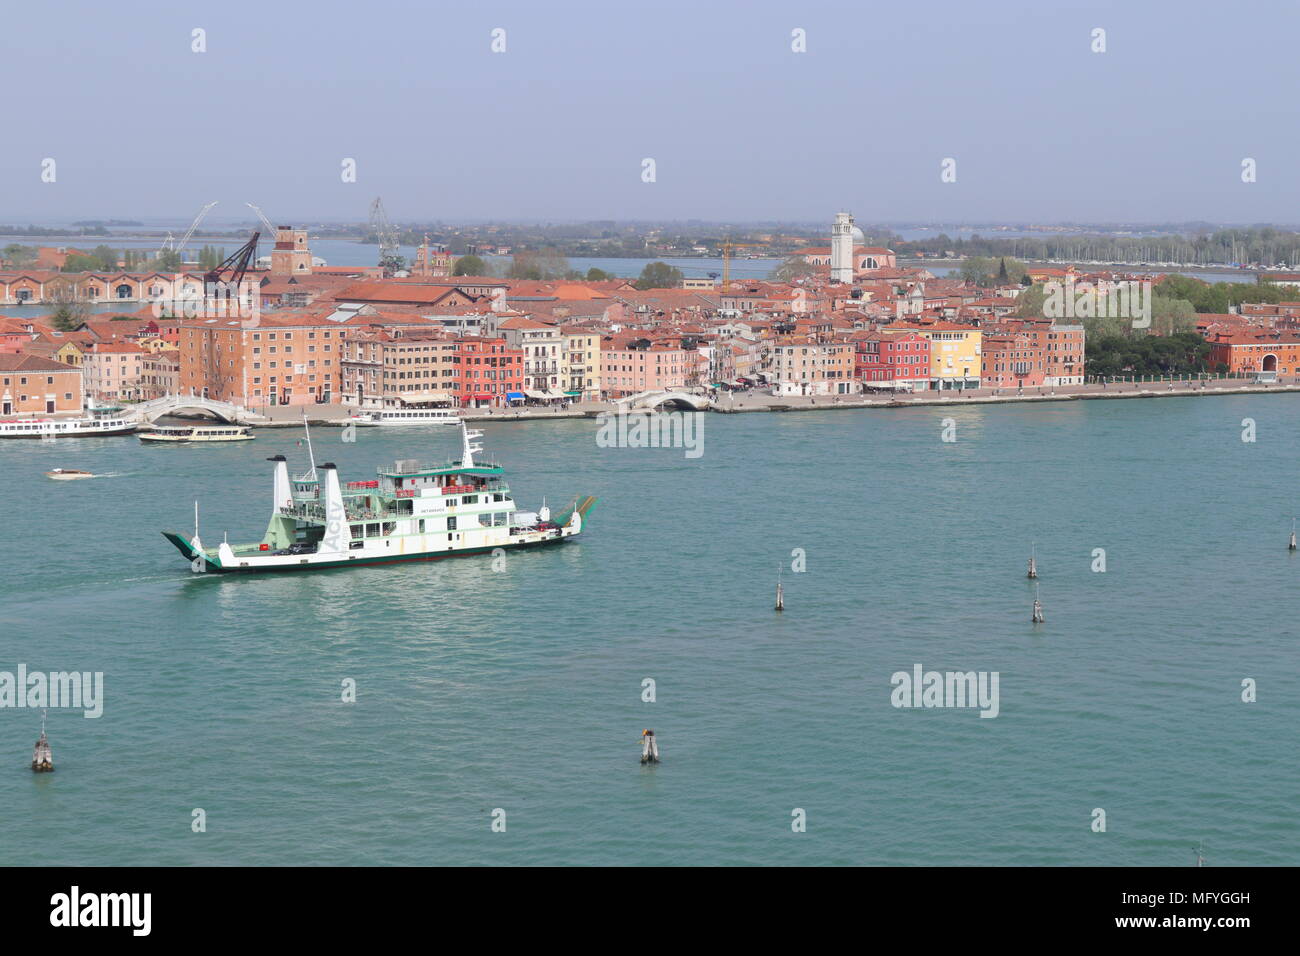 City skyline of Castello, panoramic view from the bell tower of Chiesa di San Giorgio Maggiore, sunny day, large car ferry, Venice, Italy, Europe Stock Photo